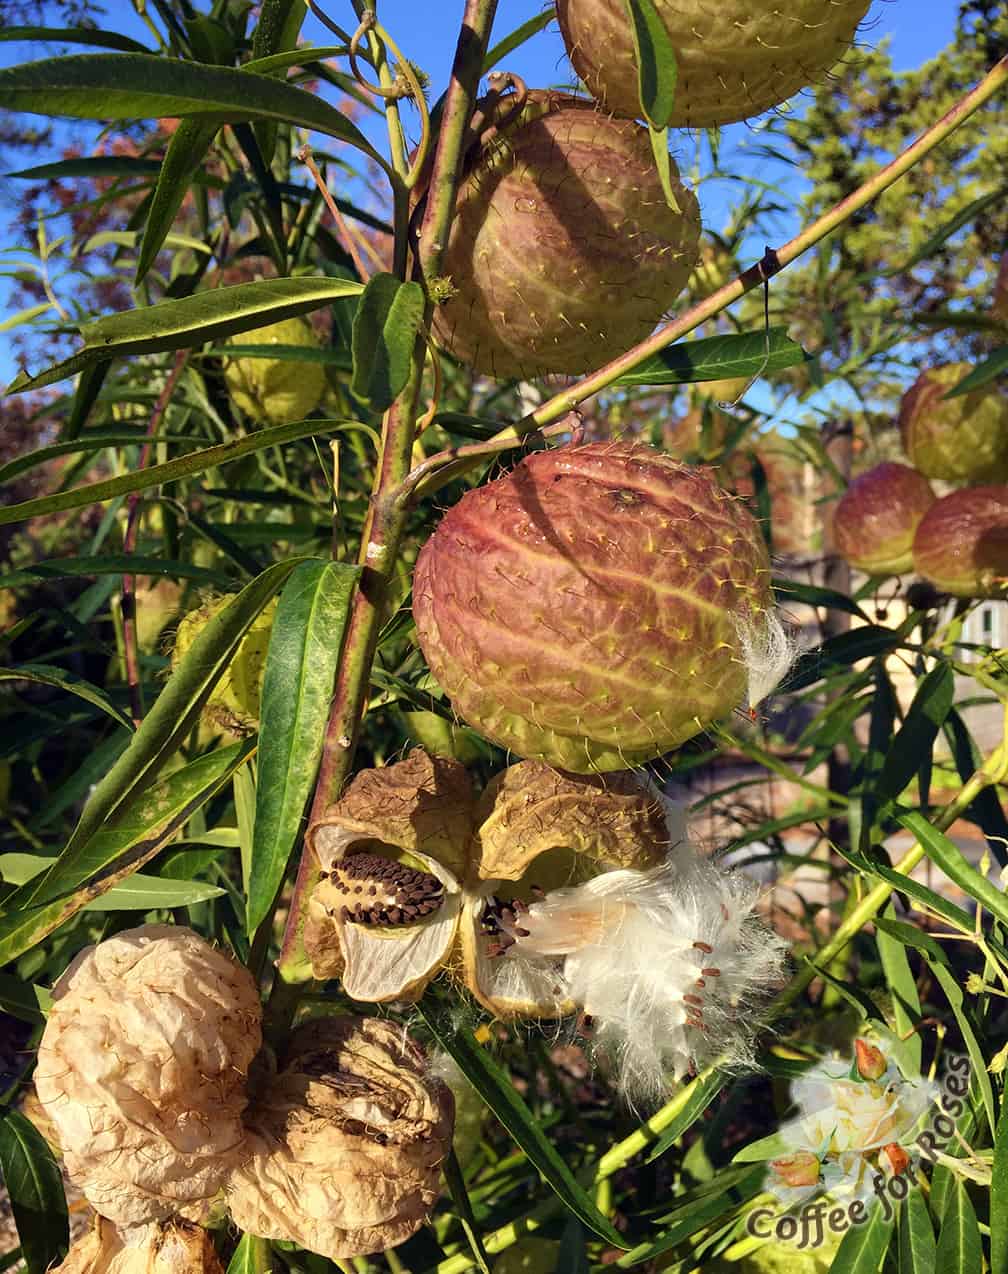 Gomphocarpus physocarpus, aka "fur balls" sails through the first frosts. The seeds burst out of the hairy pods and you immediately know that this annual is in the milkweed family. These pods dry well for indoor arrangements... and who can resist saying that they are growing "hairy balls" in the garden?